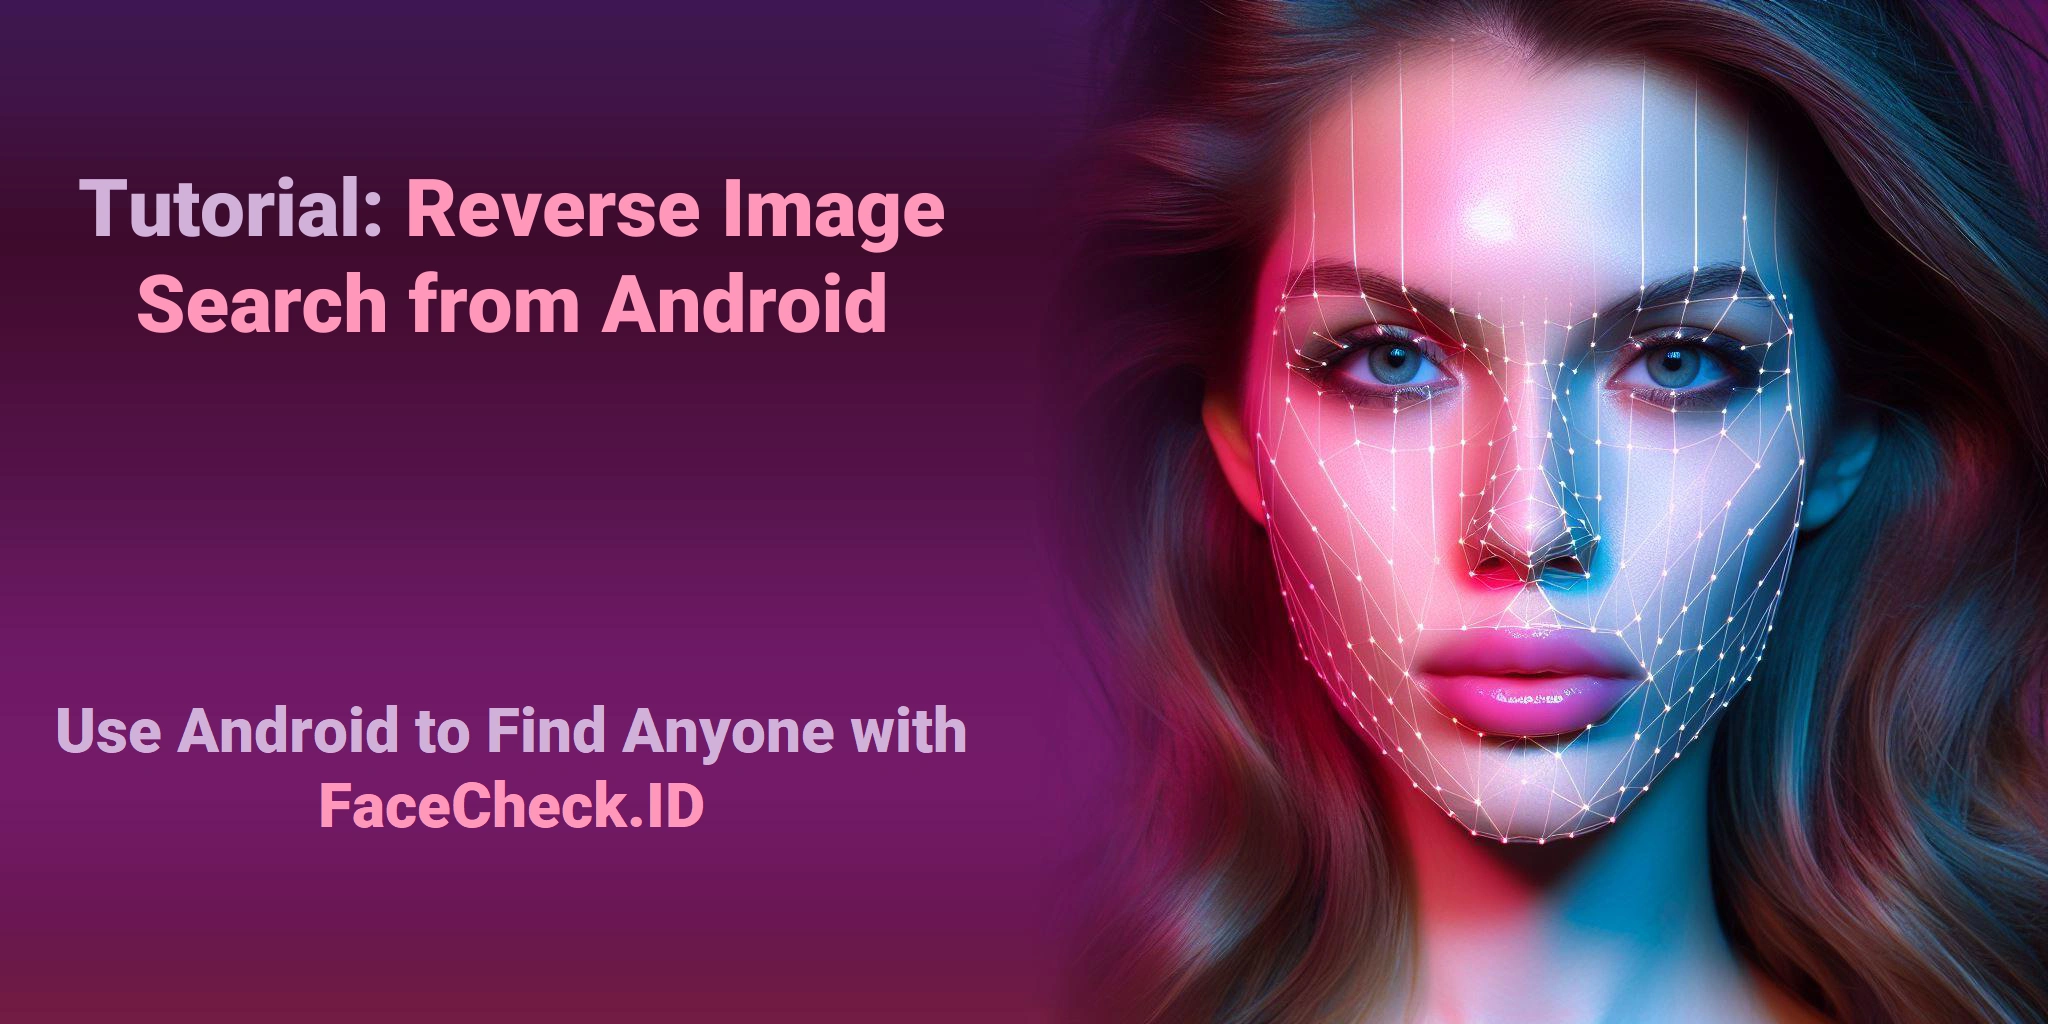 Tutorial: Reverse Image Search from Android Use Android to Find Anyone with FaceCheck.ID